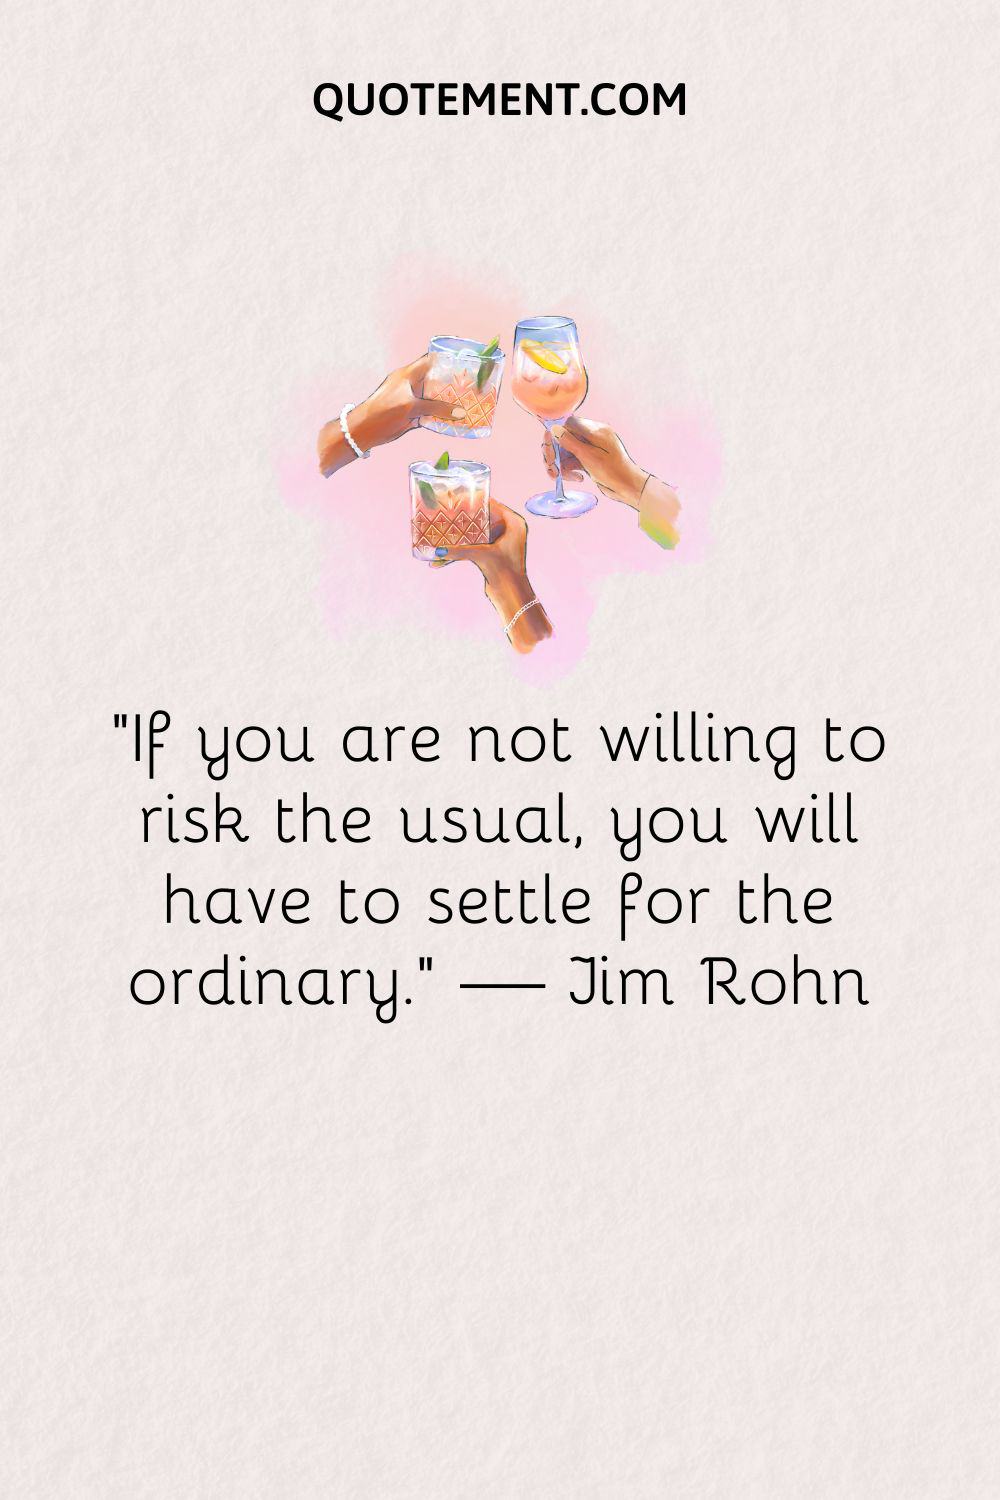 “If you are not willing to risk the usual, you will have to settle for the ordinary.” — Jim Rohn